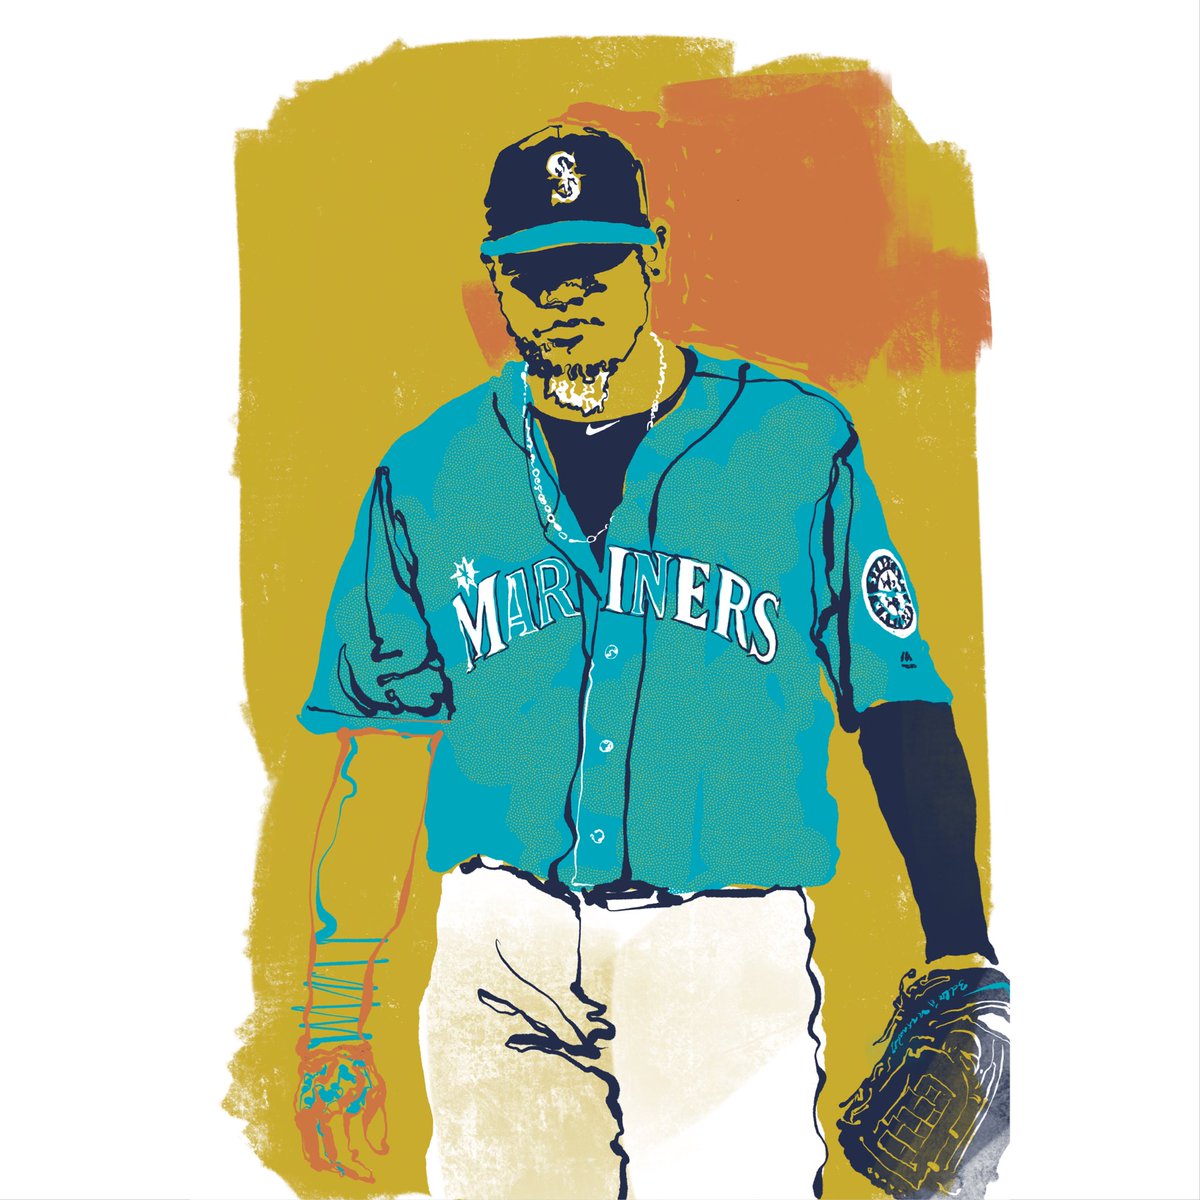 This Day in Baseball History: May 10, 2015 - Felix Hernandez records his 2,000th career strikeout in leading the Mariners to a 4 - 3 win over the Athletics; at 29, he is the fourth-youngest to the mark.
#tripleplaydesign #tpdtradingcards #felixhernandez #kingfelix #baseballcards